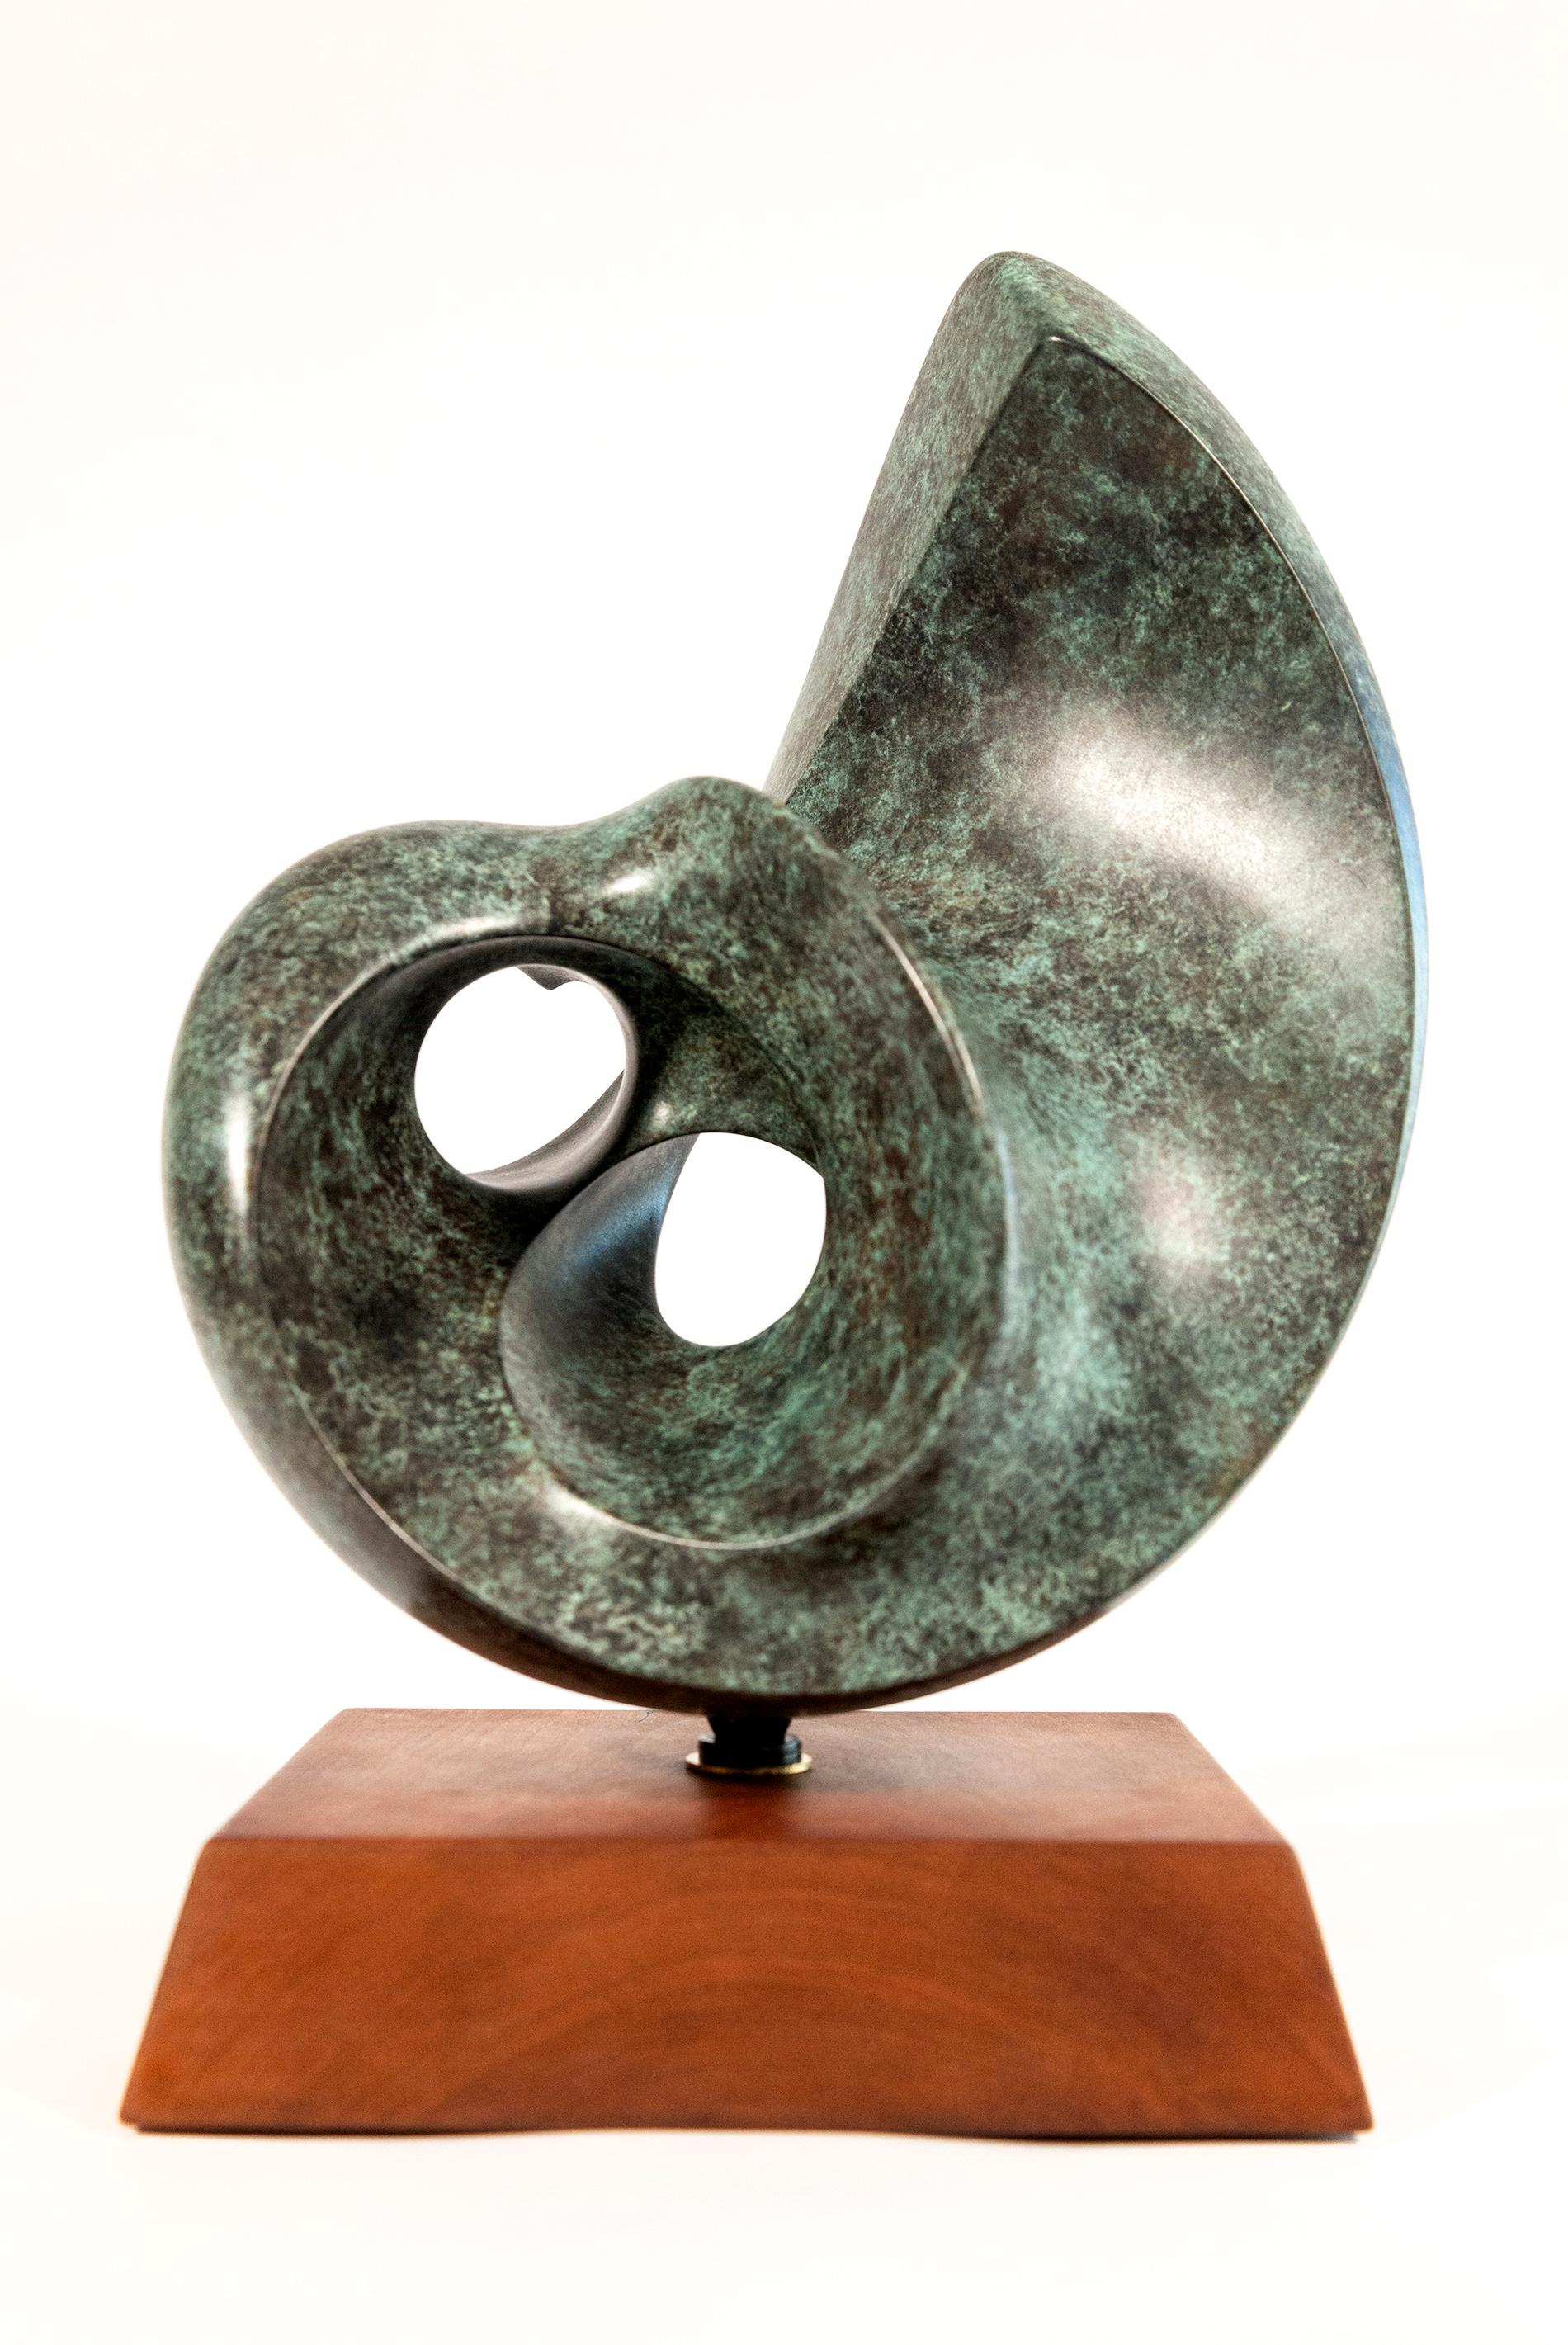 Nocturne Ed. 2/15 - smooth, polished, abstract, bronze sculpture - Sculpture by David Chamberlain